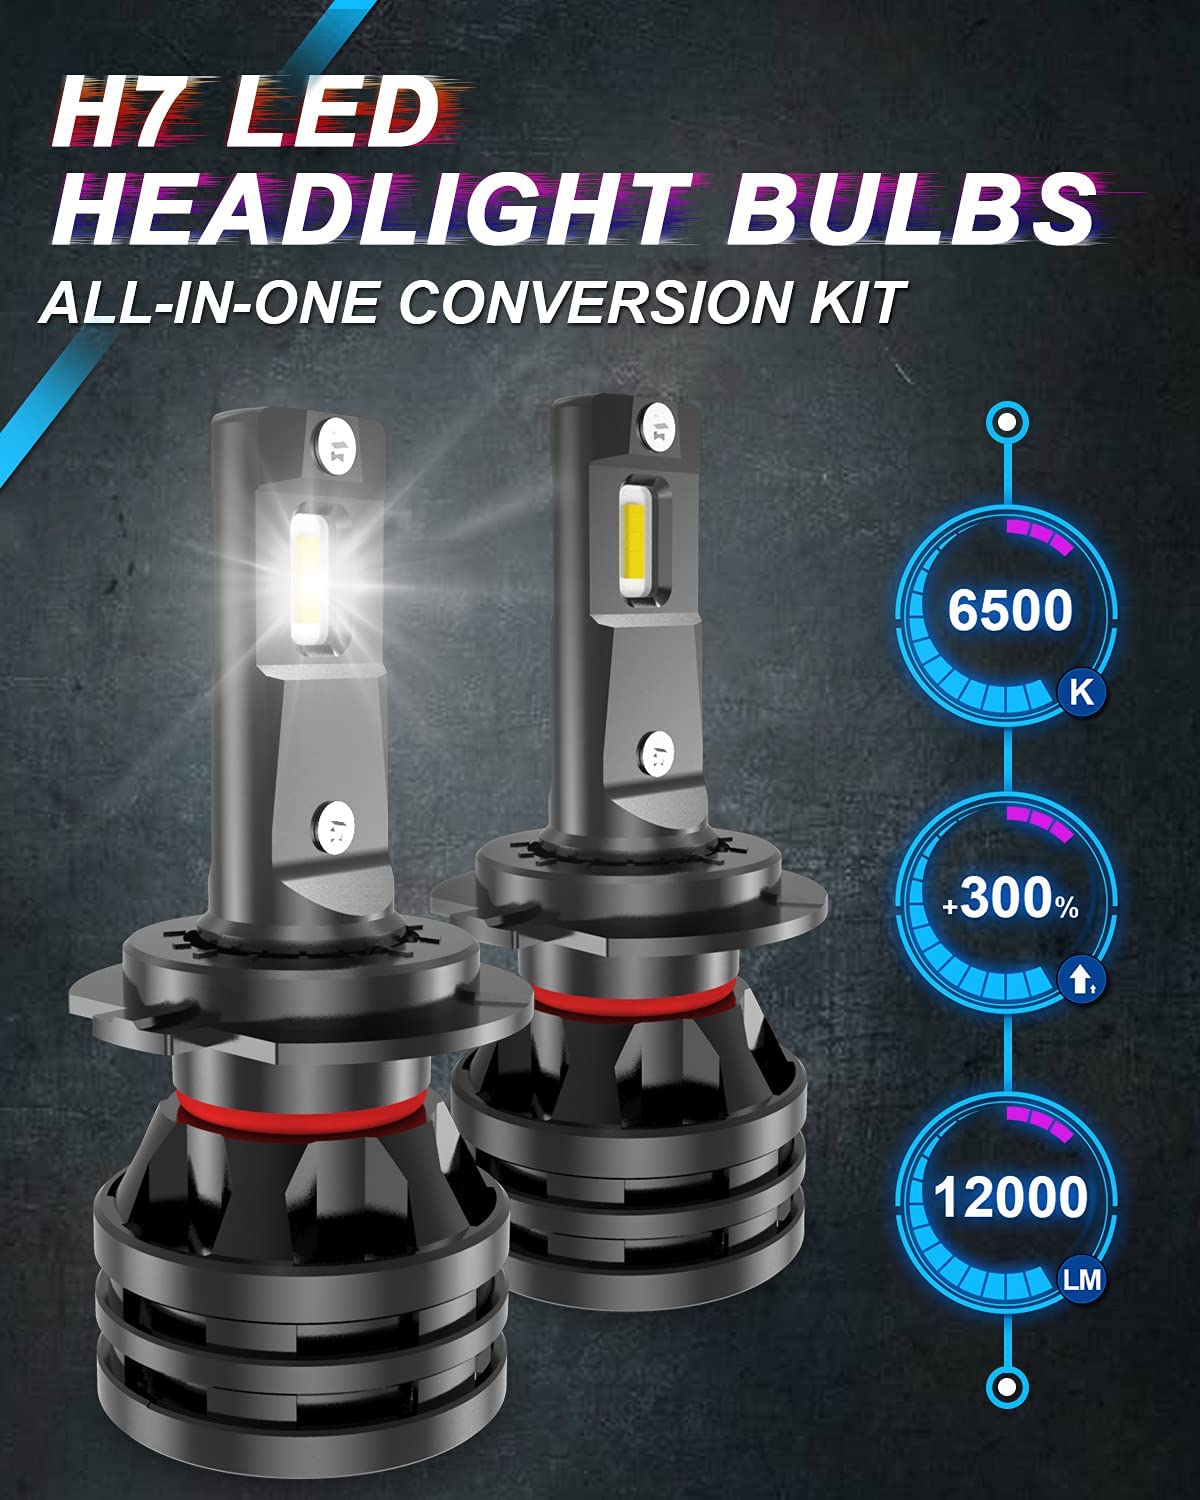 KaTur H7 Led Headlight Bulbs Mini Design Upgraded CREE Chips Extremely Bright 12000 Lumens Waterproof All-in-One LED Headlight Conversion Kit 55W 6500K Xenon White-2 Years Waranty